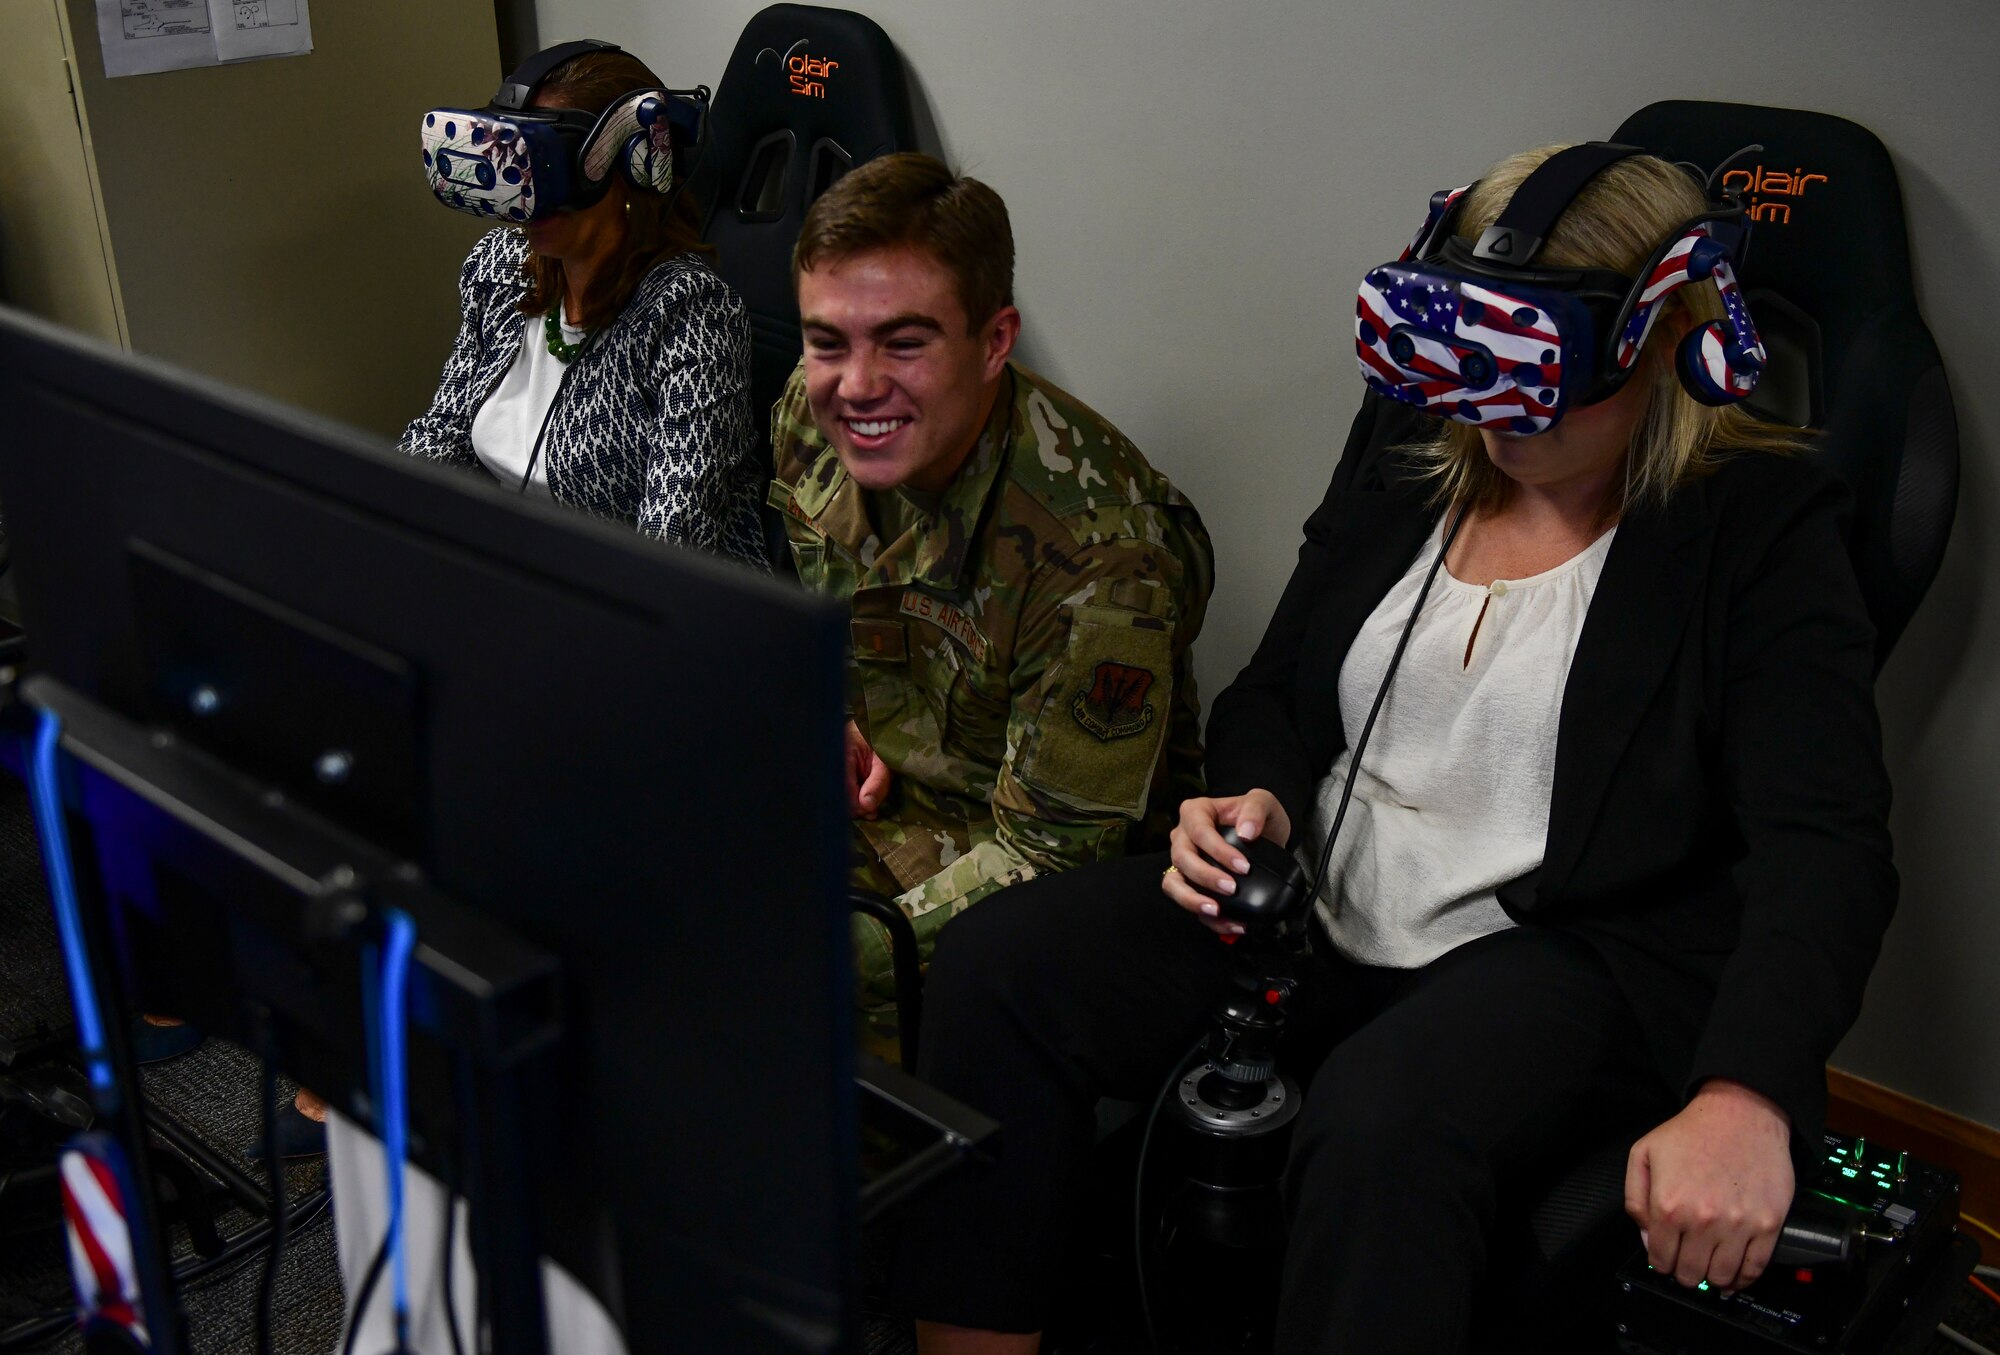 2nd Lt. Johnny Griffith, 4th Training Squadron virtual reality innovation manager, shows distinguished visitors how to fly an F-15E Strike Eagle while using a VR setup at Seymour Johnson Air Force Base, North Carolina, August 29, 2019. The DV’s were part of a tour for North Carolina Governor Roy Cooper, and saw some of the innovative techniques the base is using to train its aircrew. (U.S. Air Force photo by Senior Airman Kenneth Boyton)